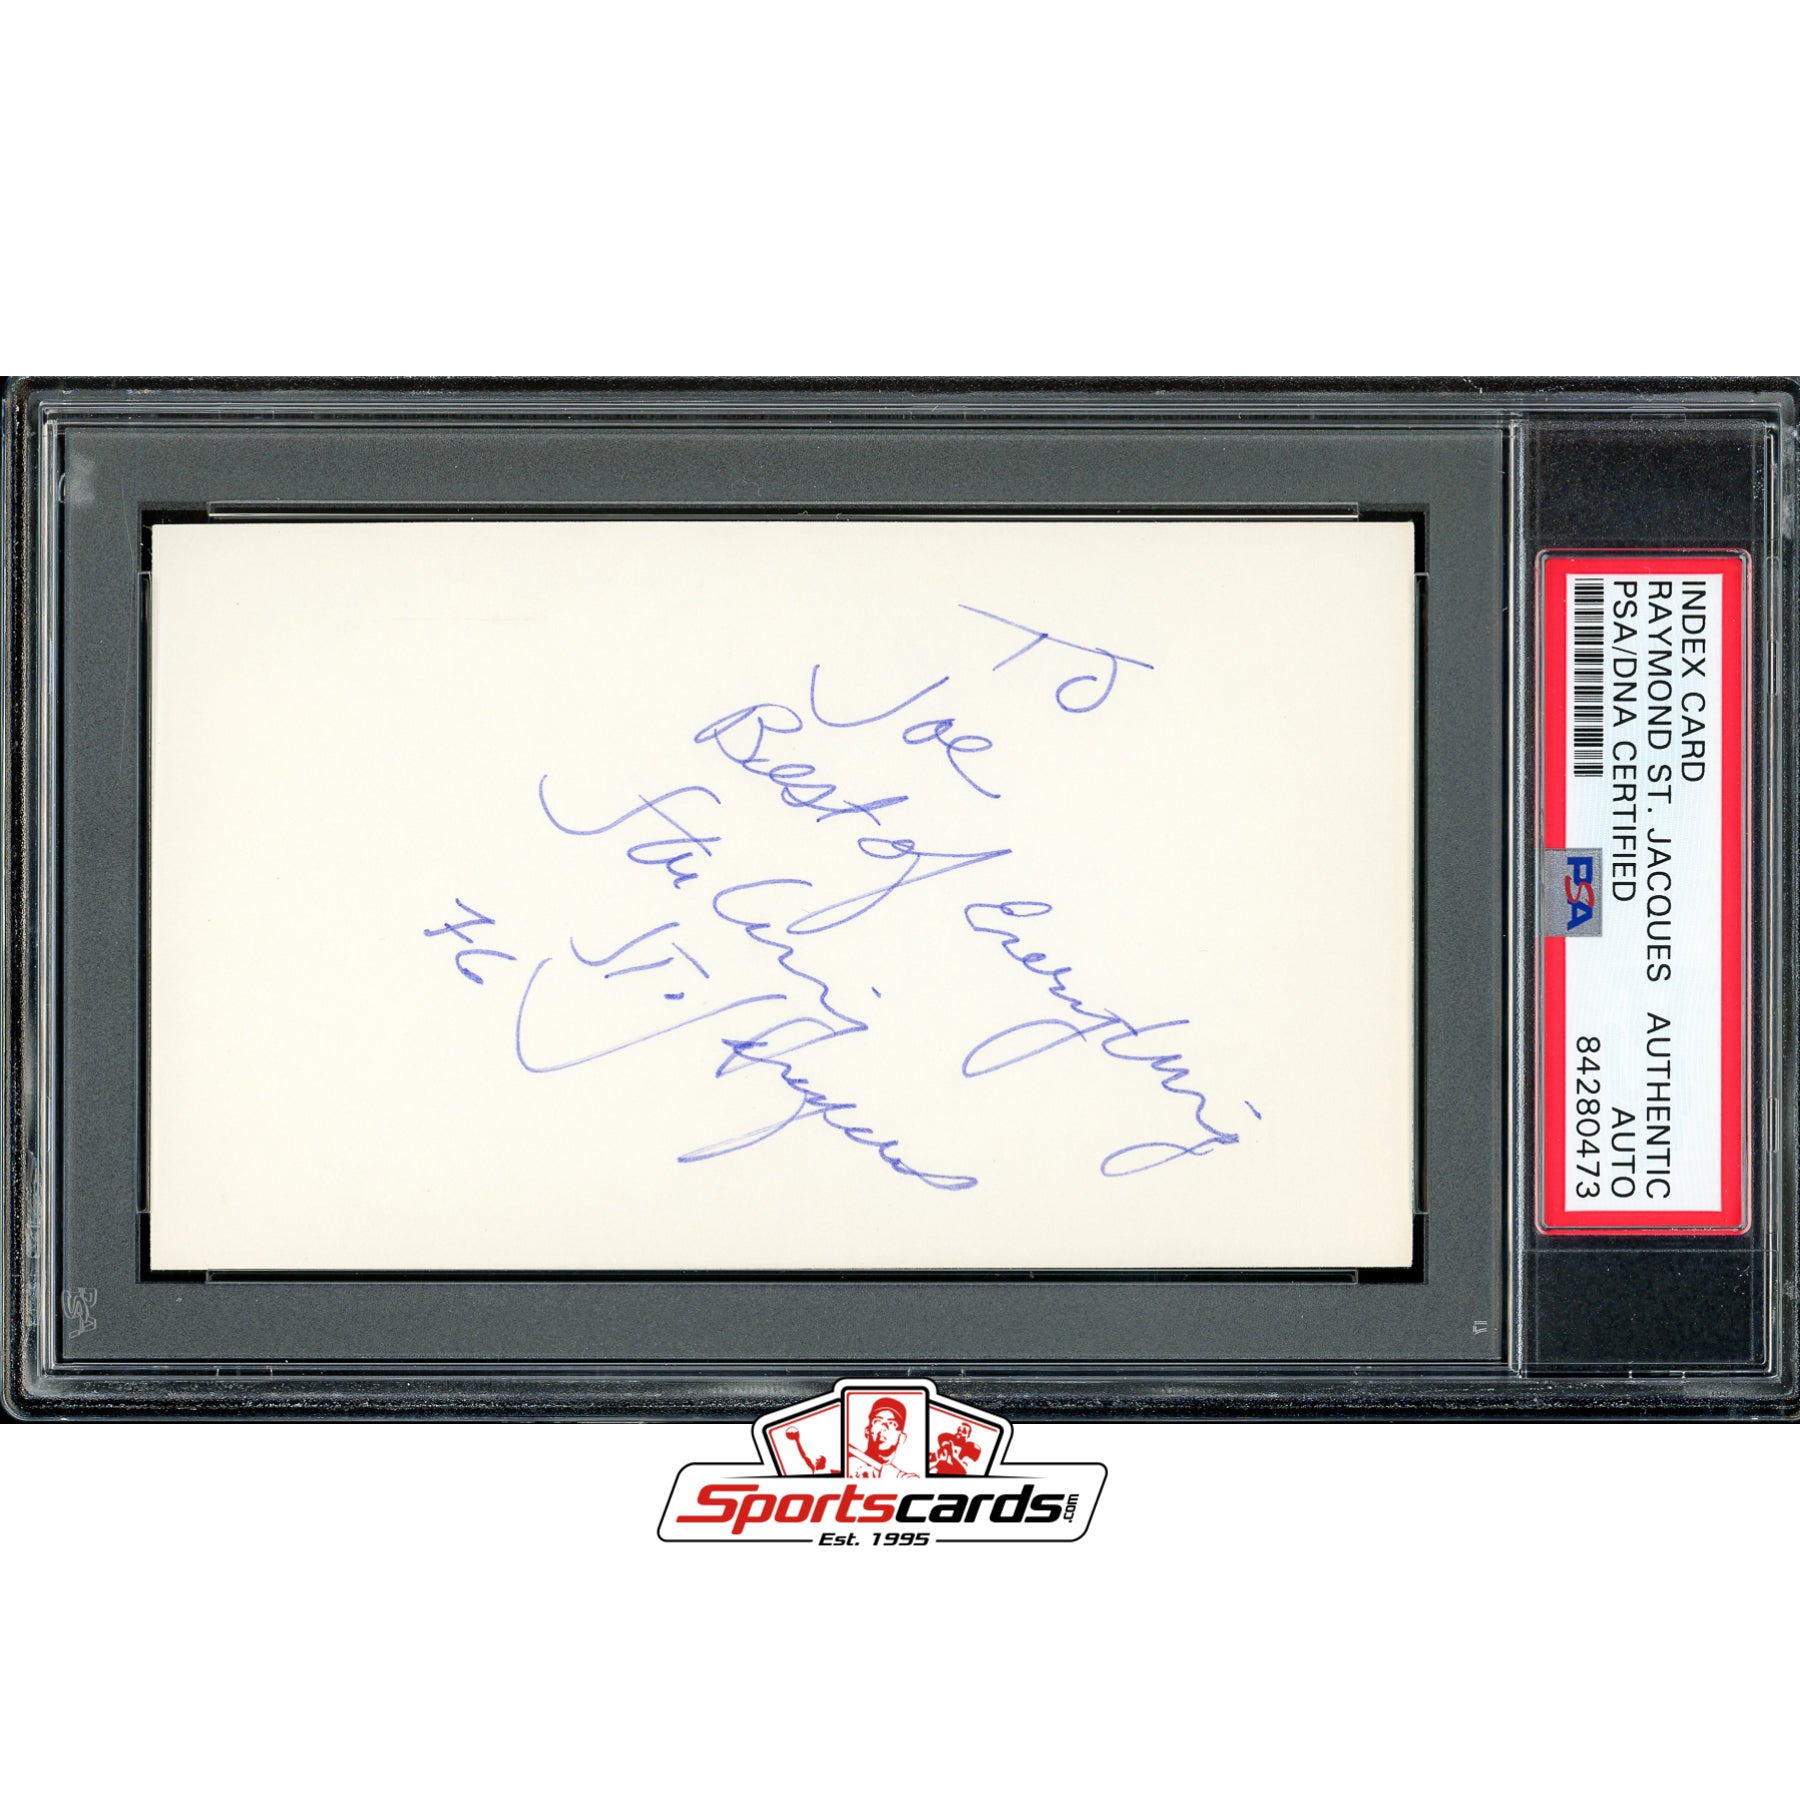 Rawhide Actor Raymond St. Jacques (d.1990) Signed 3x5 Index Card Autograph PSA/DNA